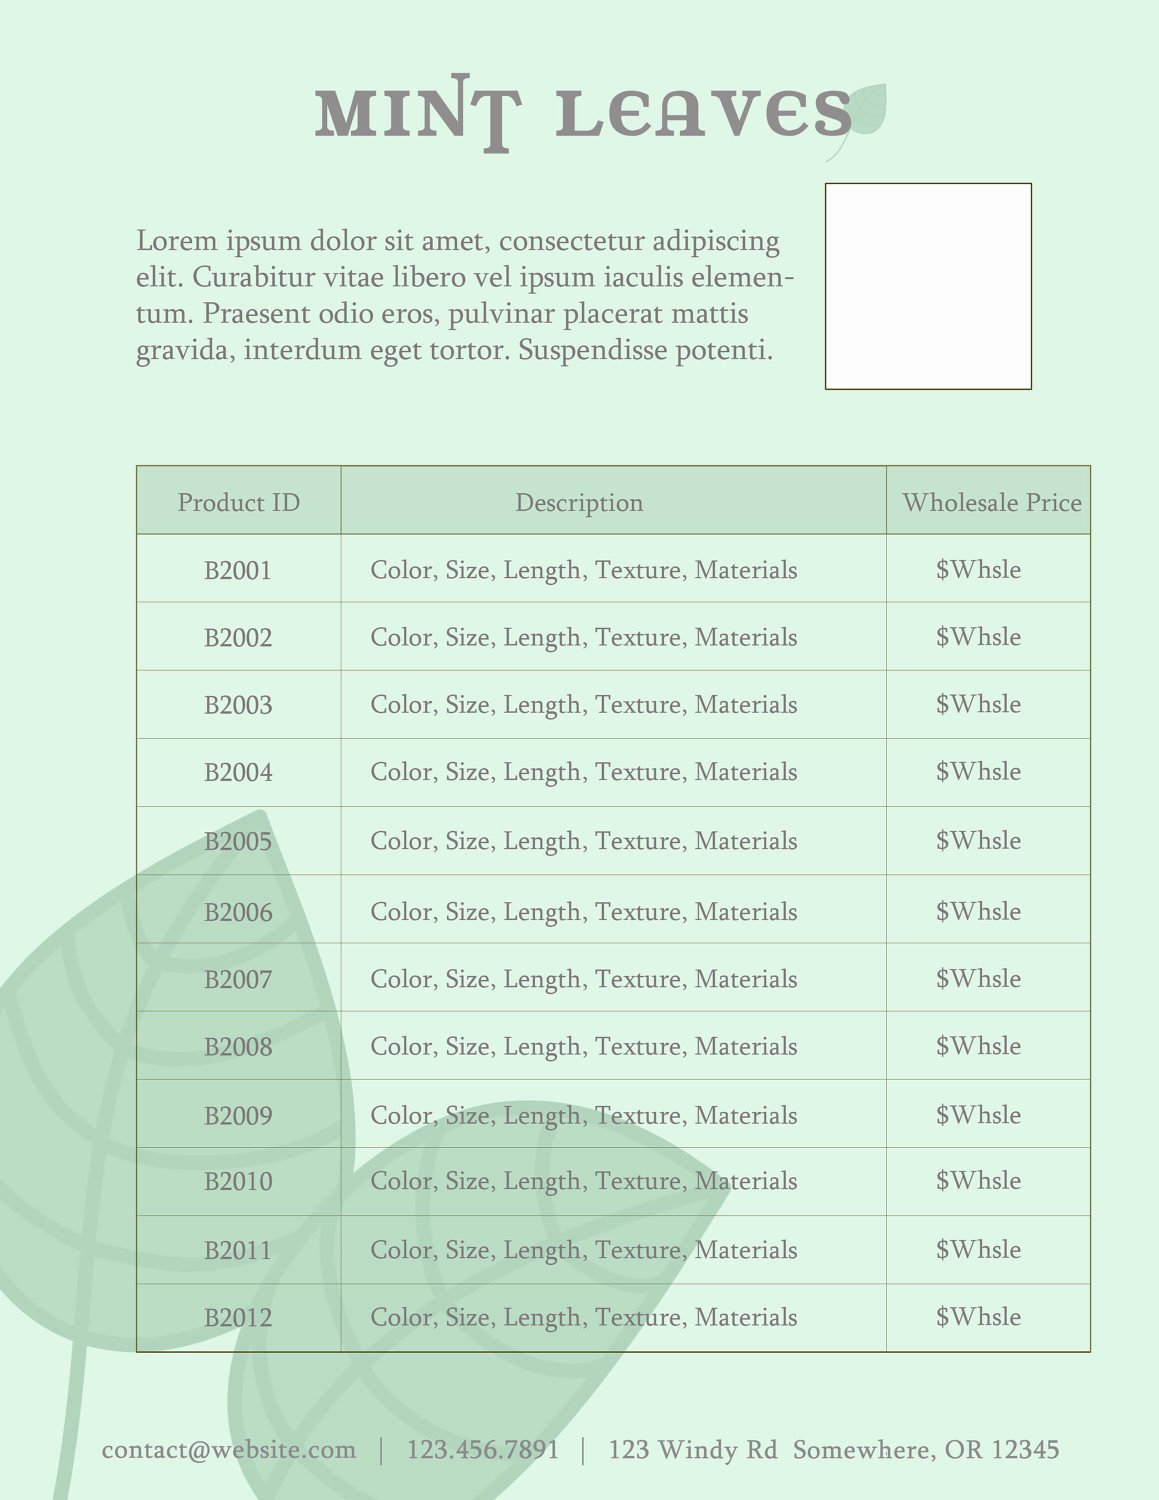 Price Sheet for Line Sheet or wholesale Catalog Template Add